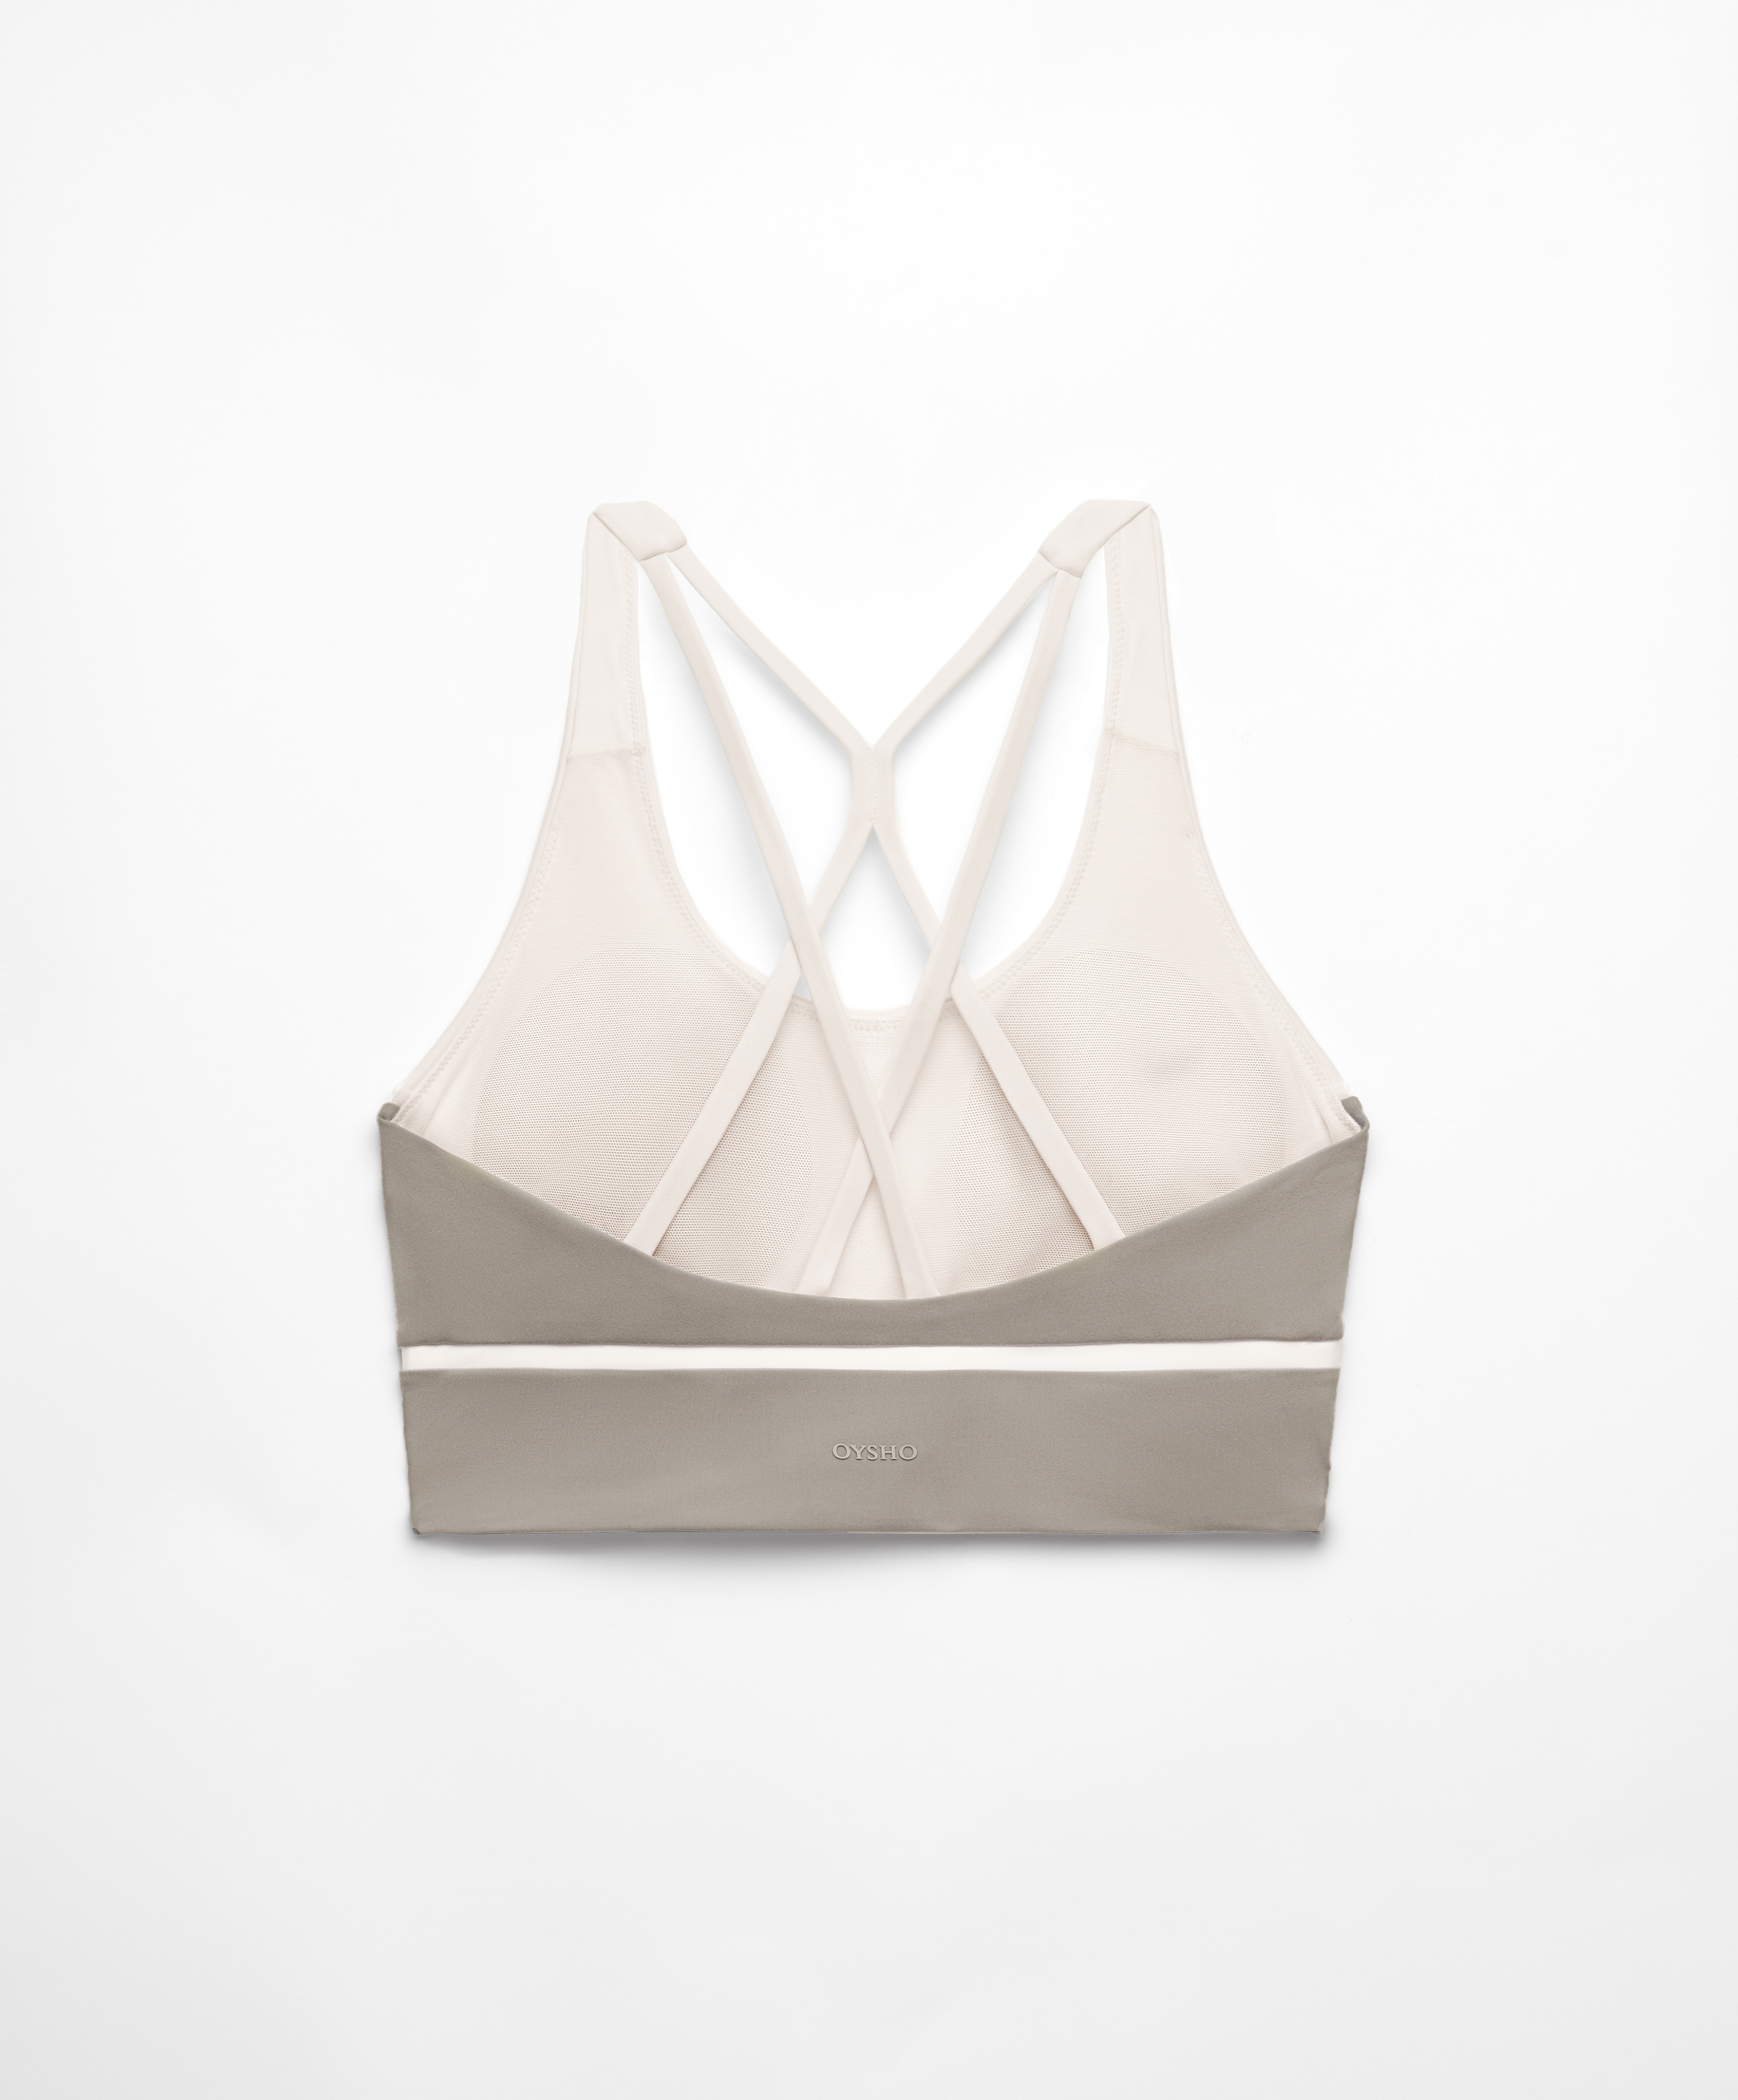 Medium-support Comfortlux sports bra with piping and cups